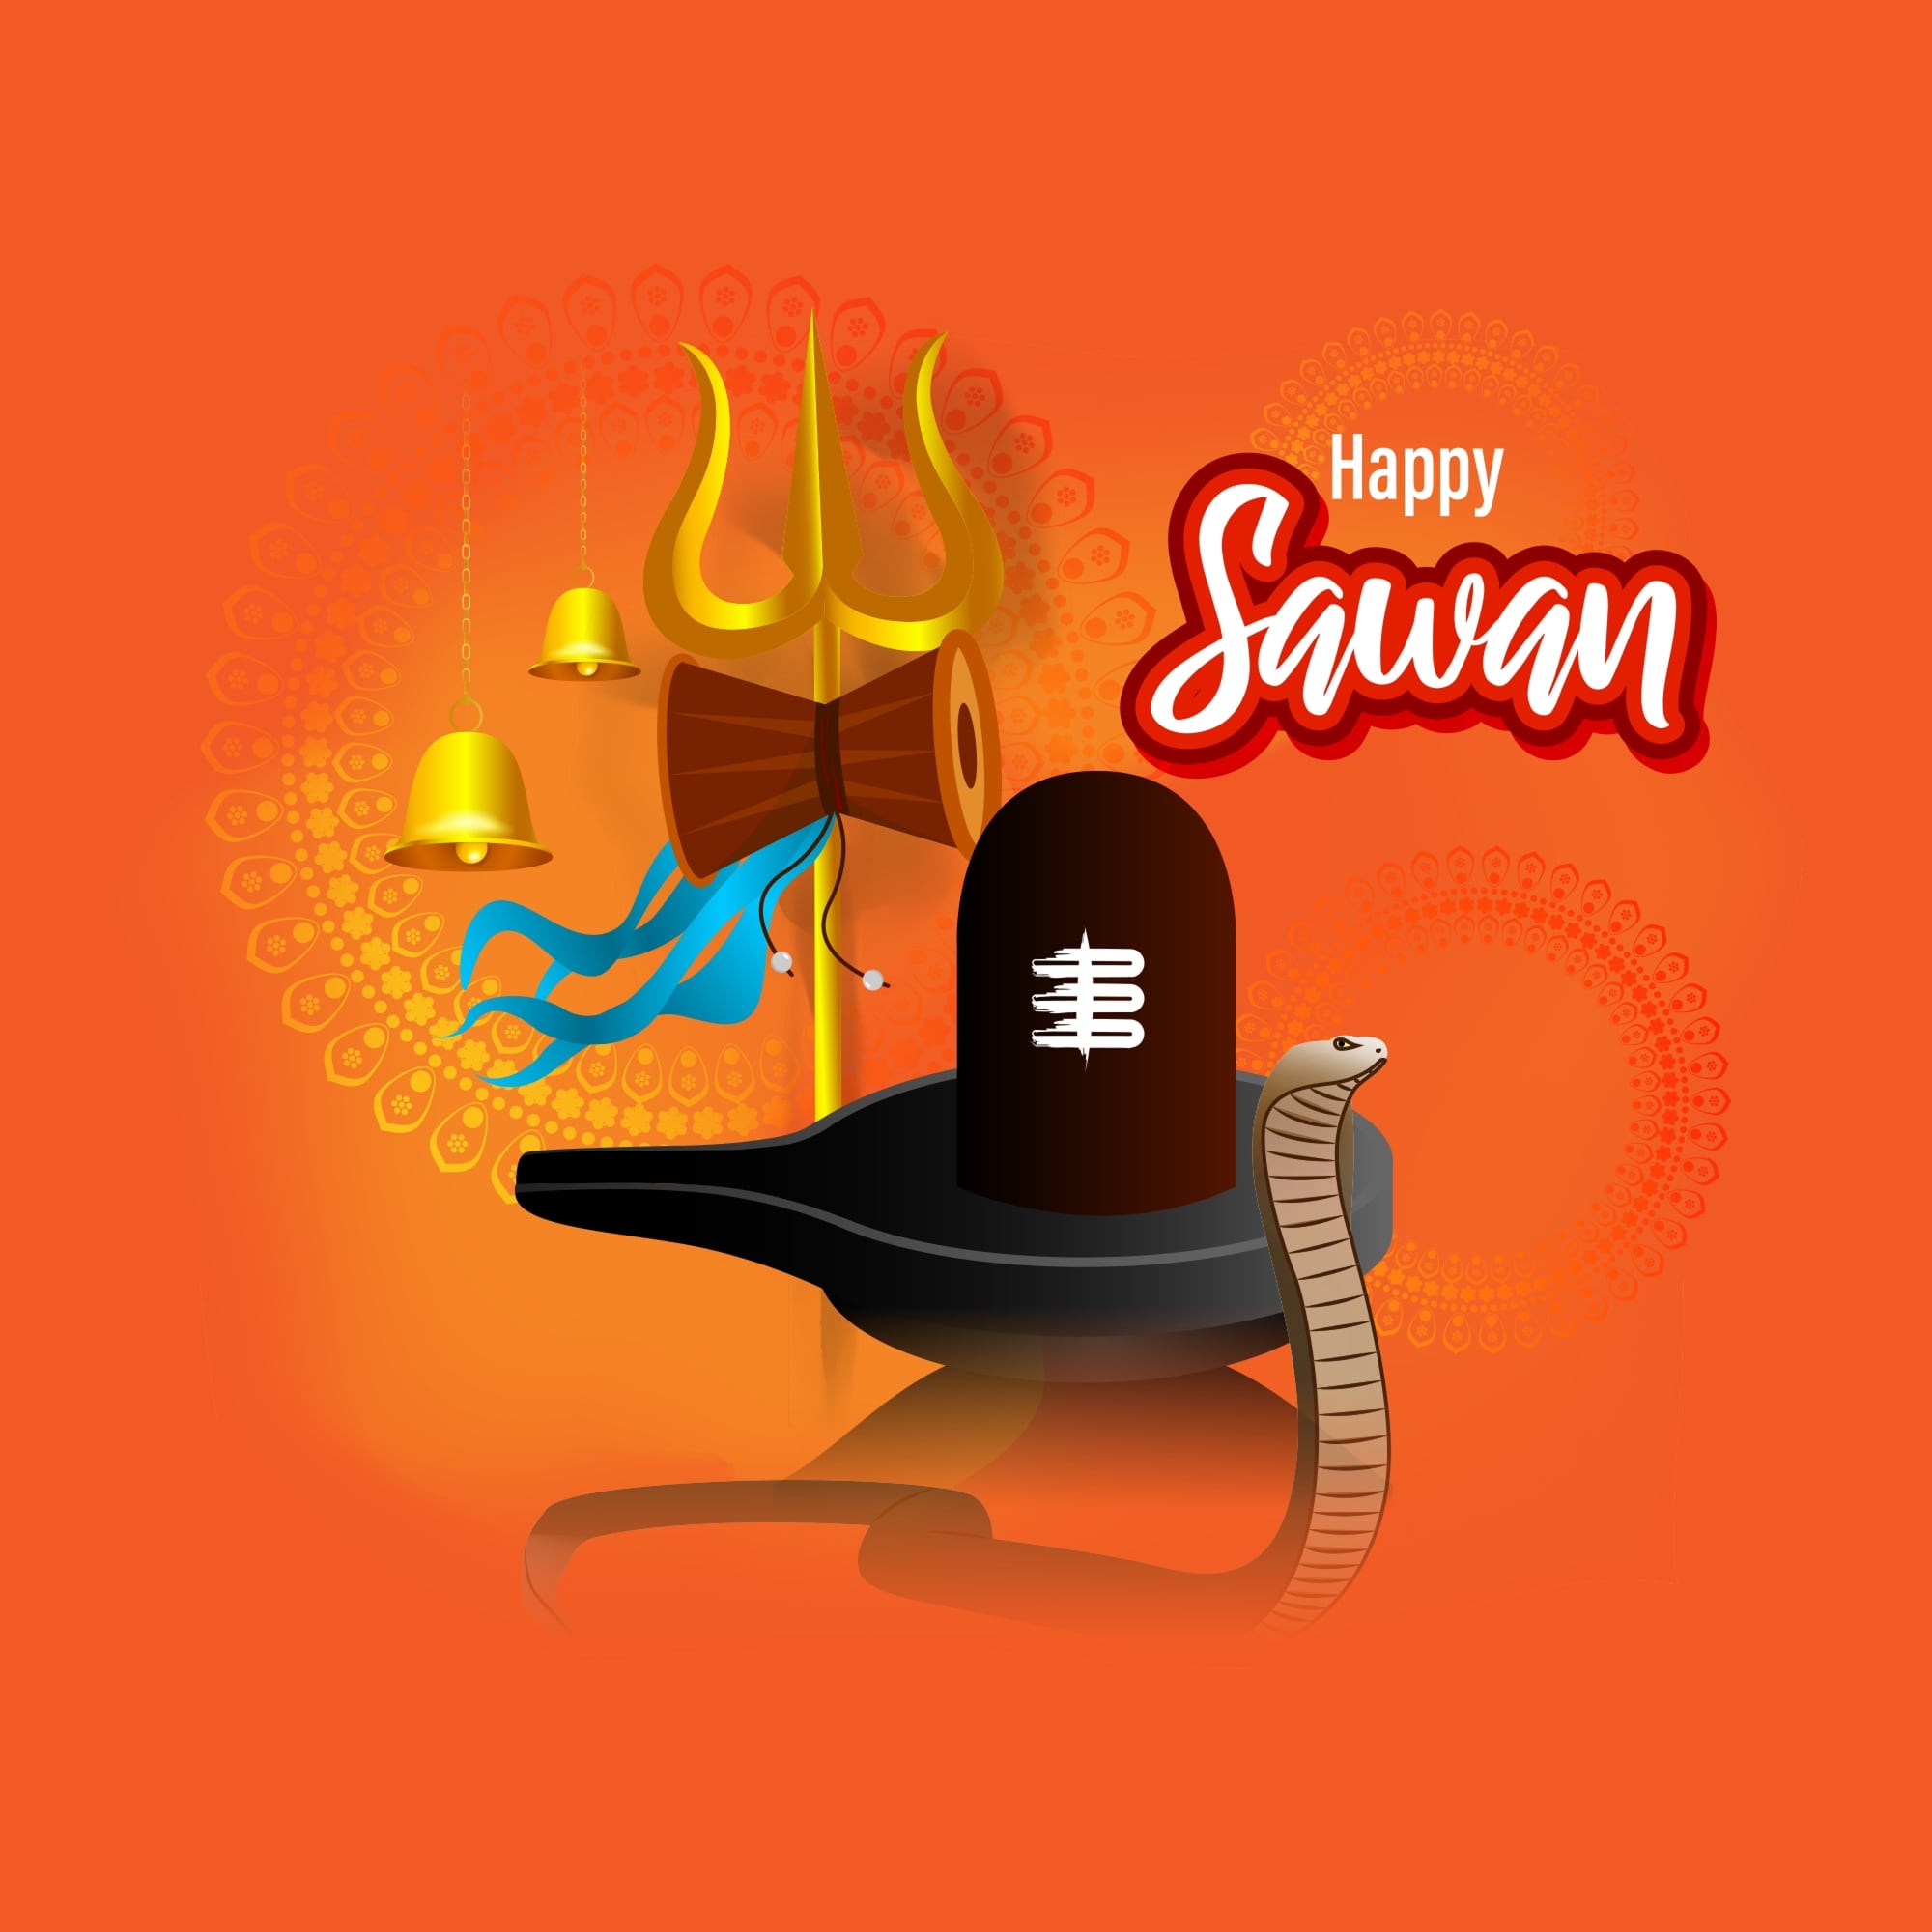 Happy Sawan 2022: Images, wishes, quotes, messages and WhatsApp greetings to share. (Image: Shutterstock)